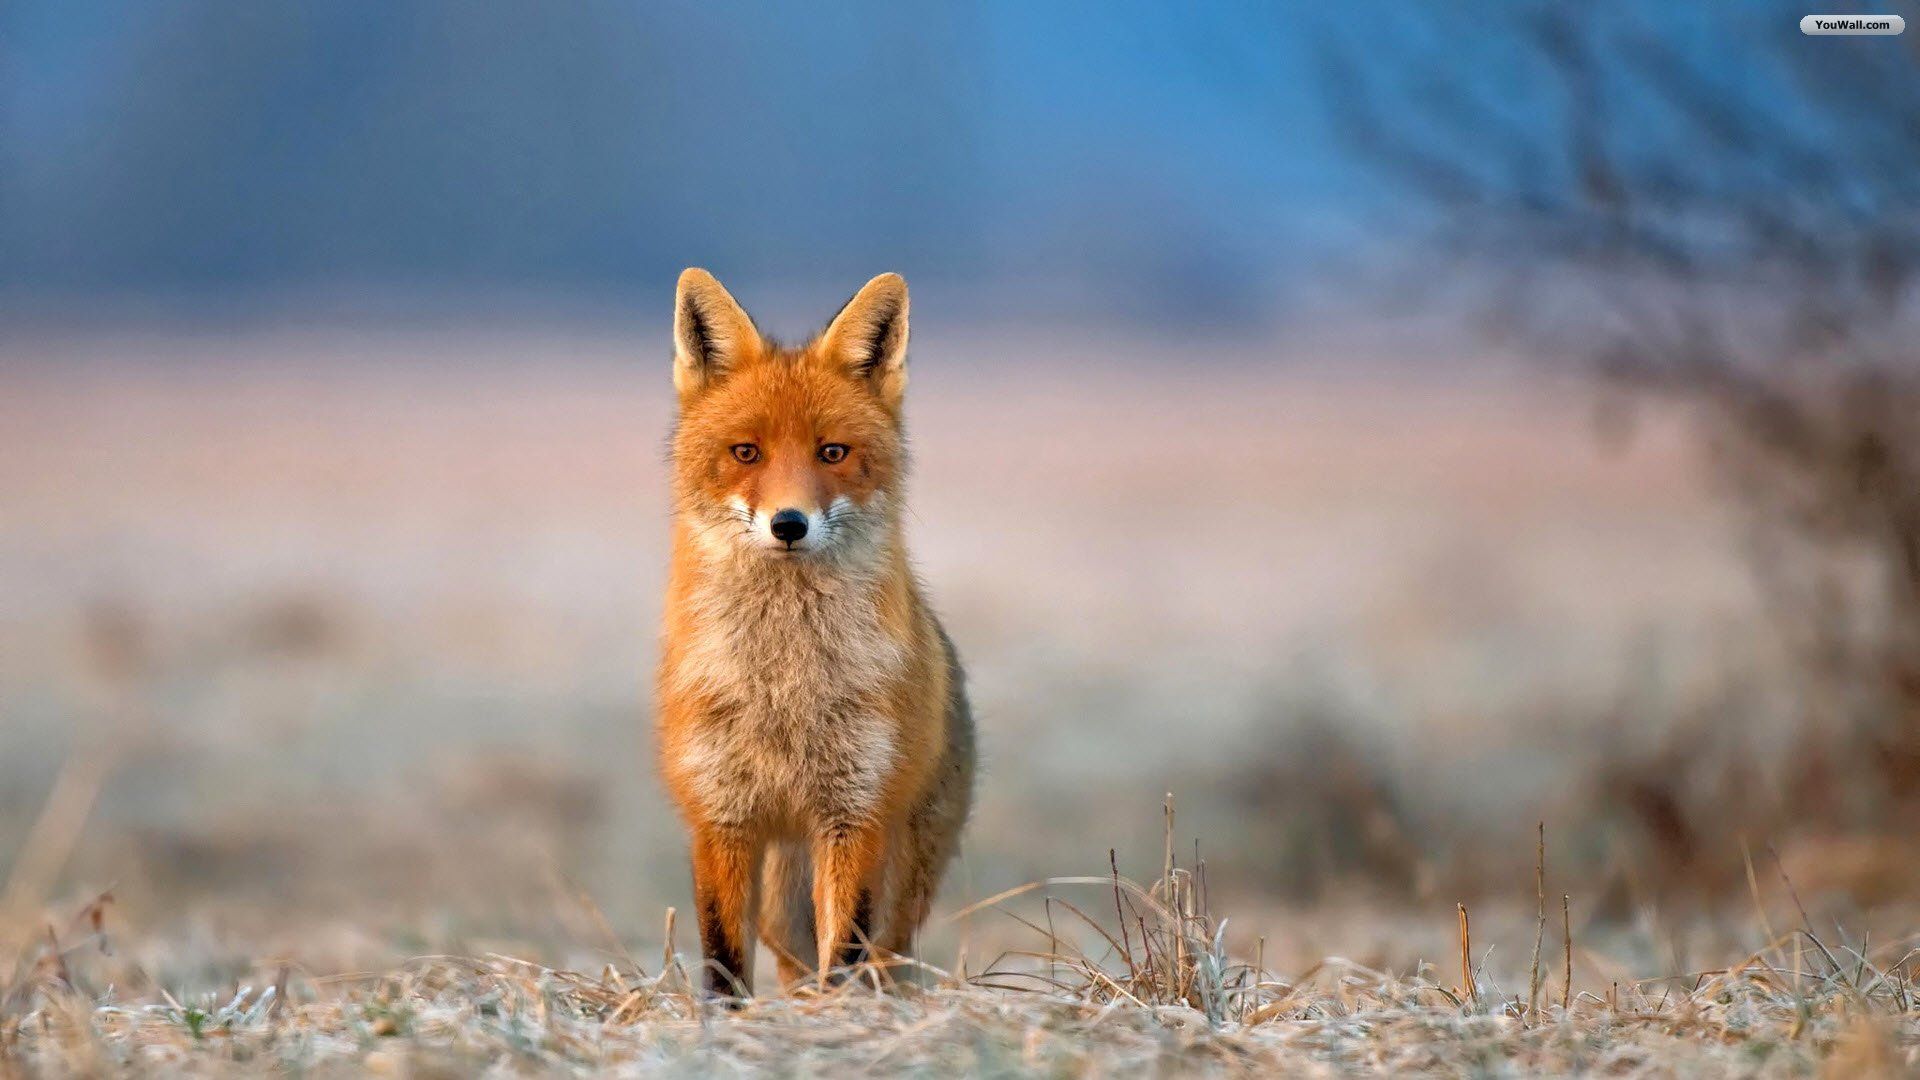 Free download Lonely Red Fox Wallpaper wallpaperwallpaperfree wallpaper [1920x1080] for your Desktop, Mobile & Tablet. Explore Red Fox Picture for Wallpaper. Red Fox Picture for Wallpaper, Red Fox Wallpaper